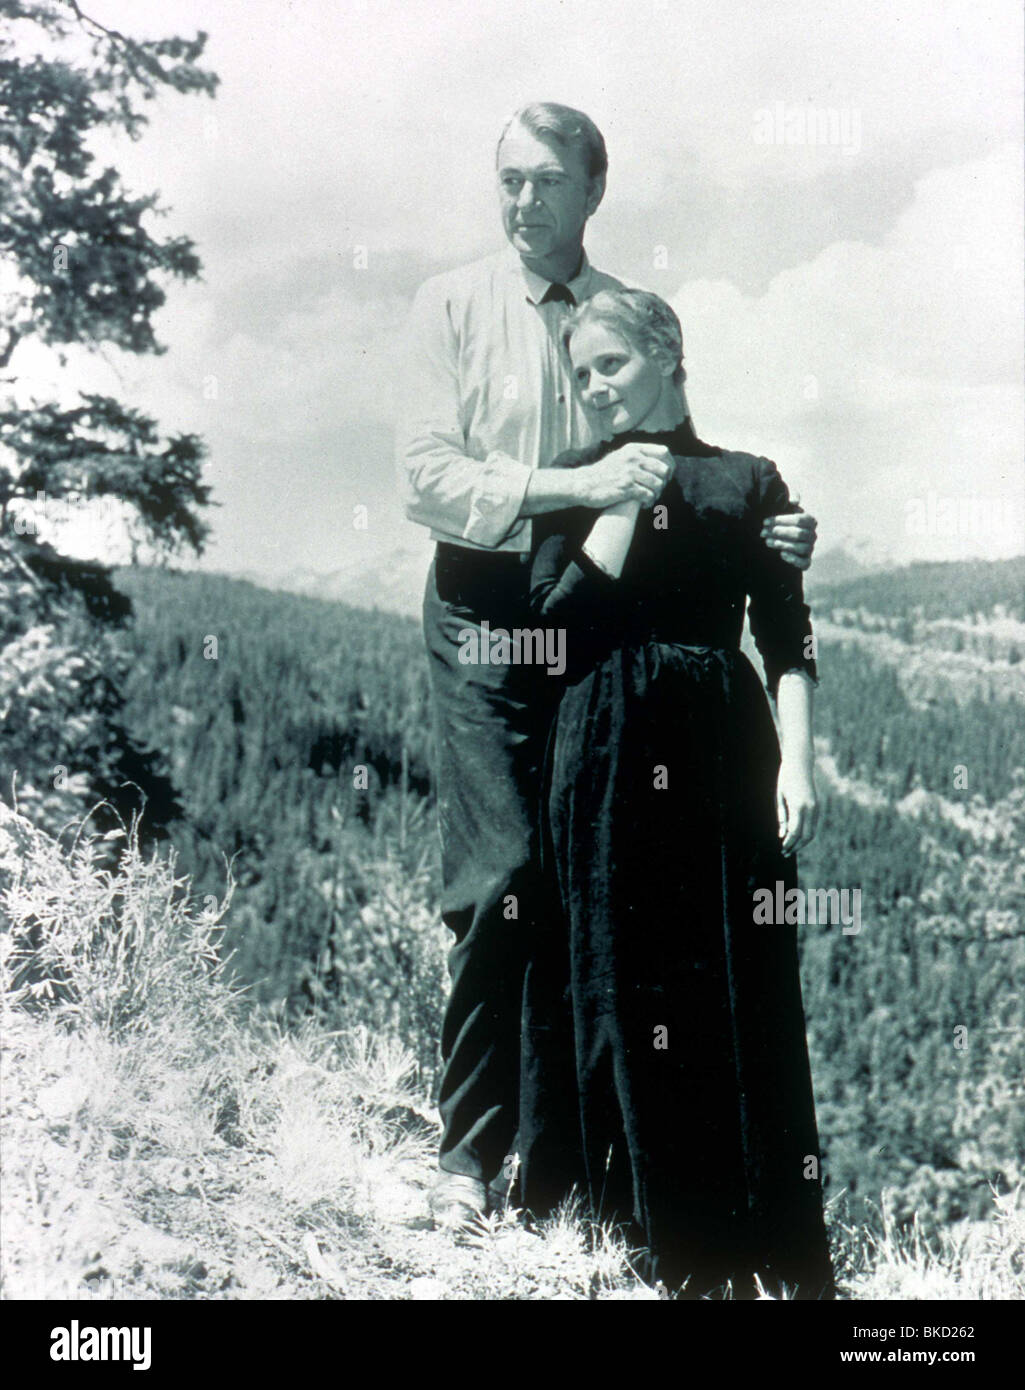 Le HANGING TREE (1959) Gary Cooper, MARIA SCHELL HGTR 002 Banque D'Images